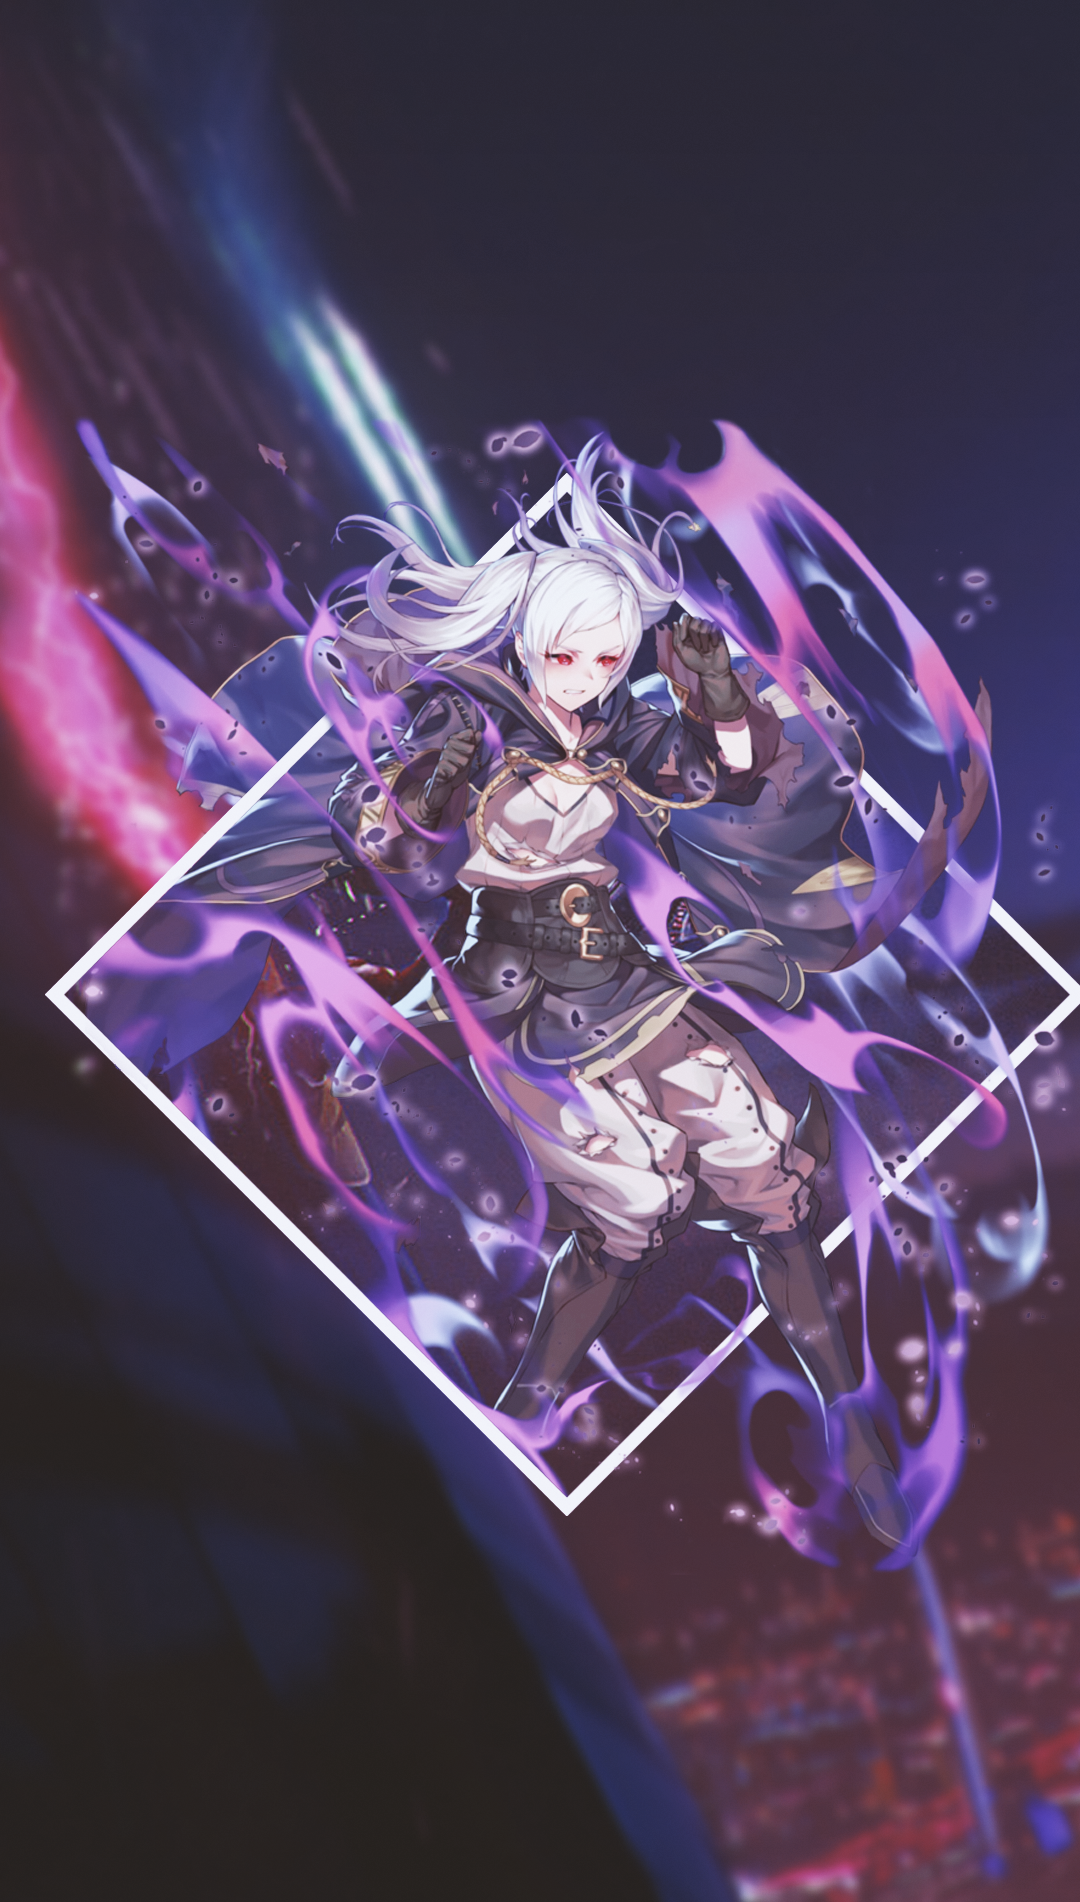 Anime Anime Girls Picture In Picture Fire Emblem Awakening Robin Fire Emblem 1080x1902